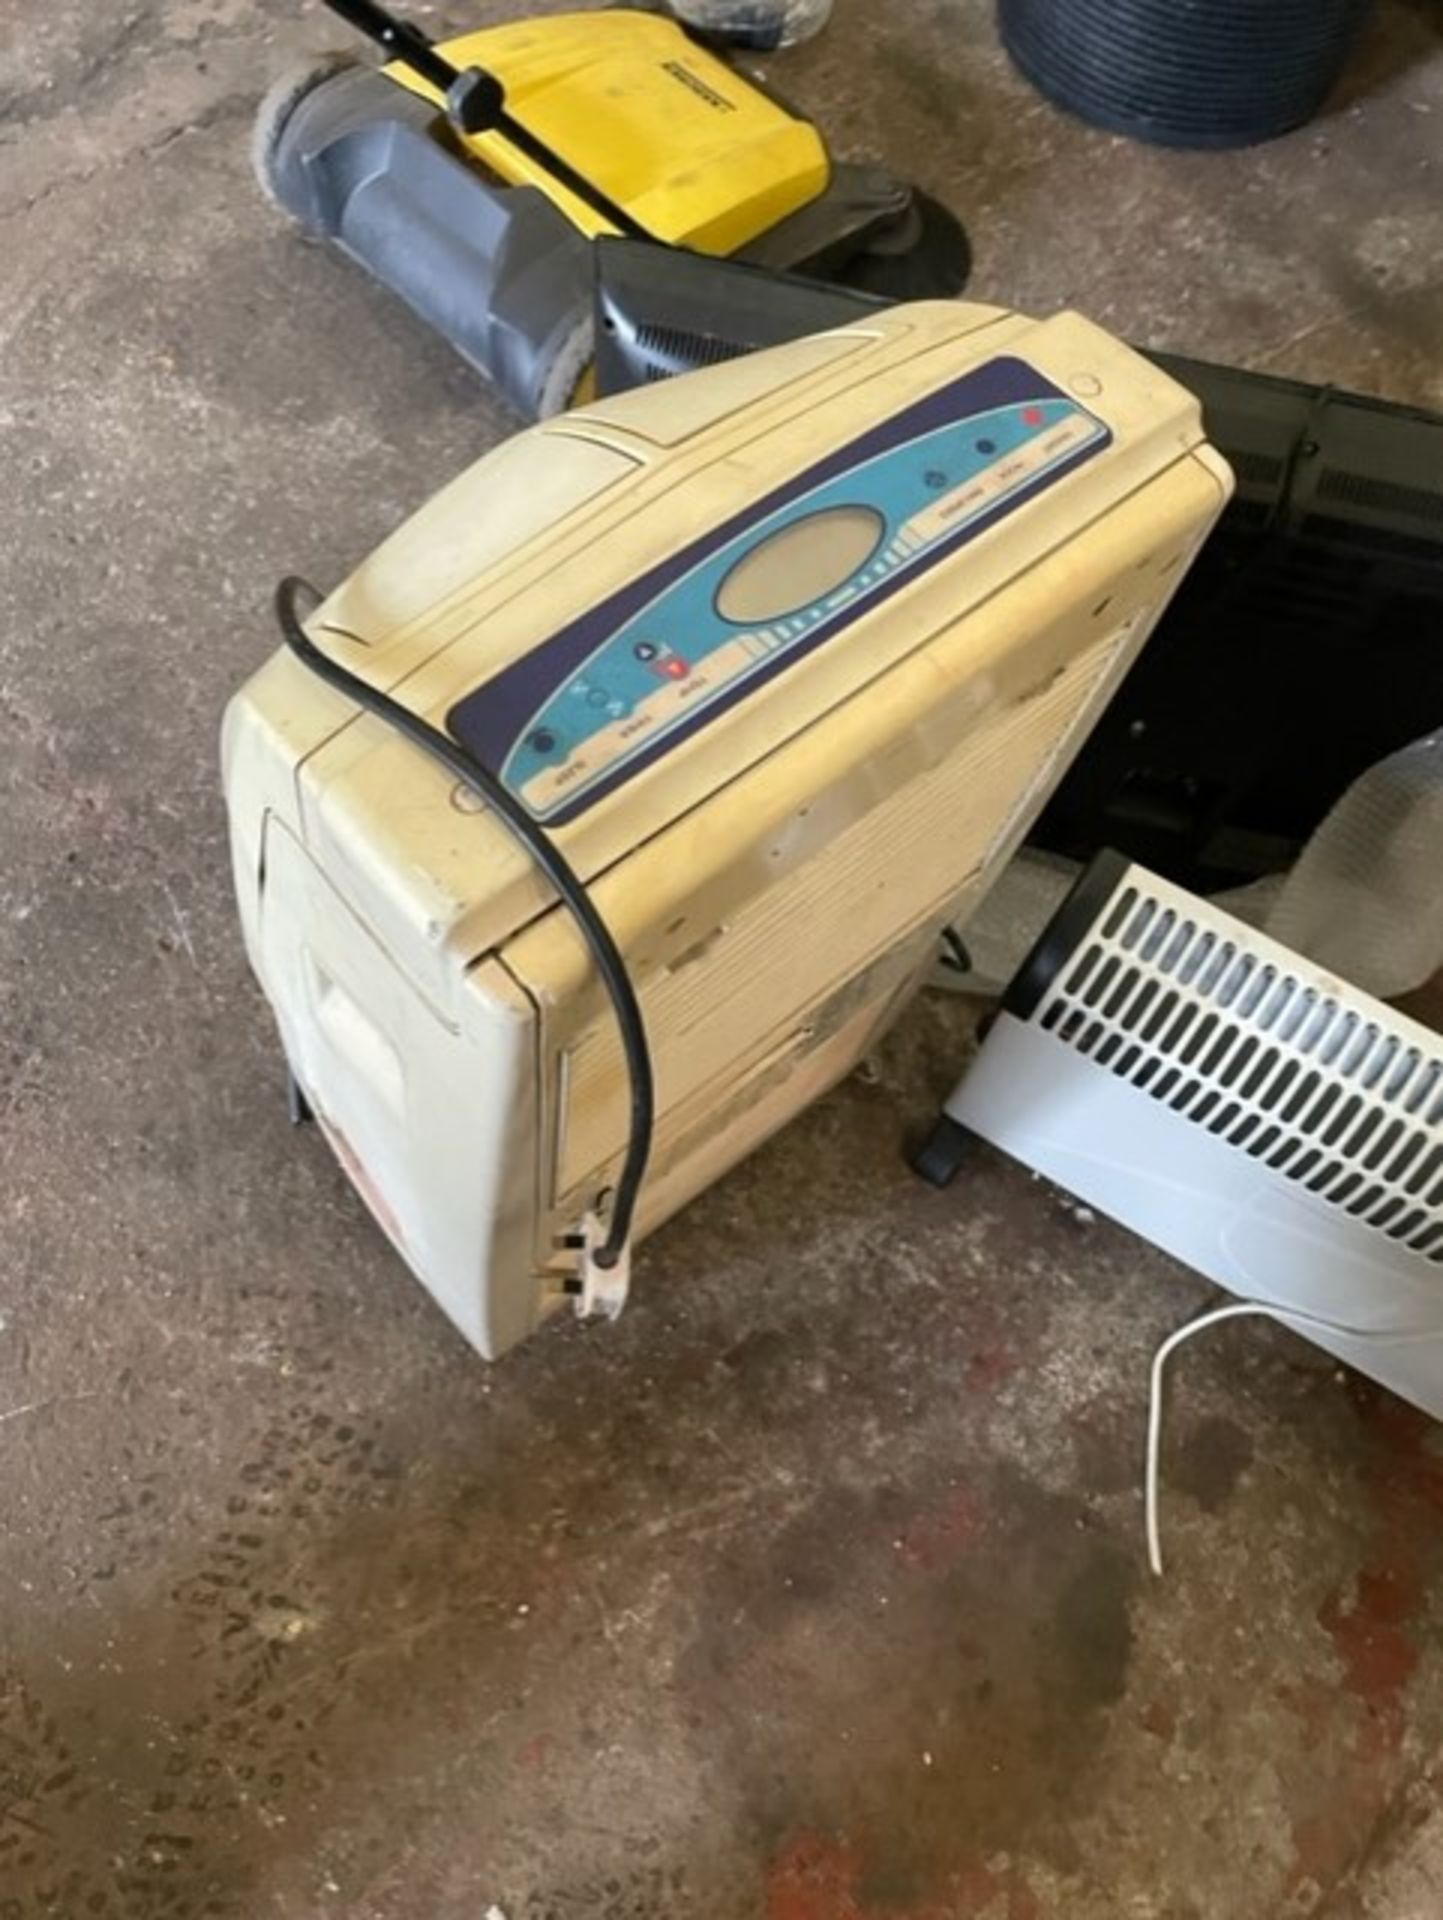 Air conditioning unit it works but has panel missing in the bottom and it has 2 of the 4 wheels - Image 2 of 2